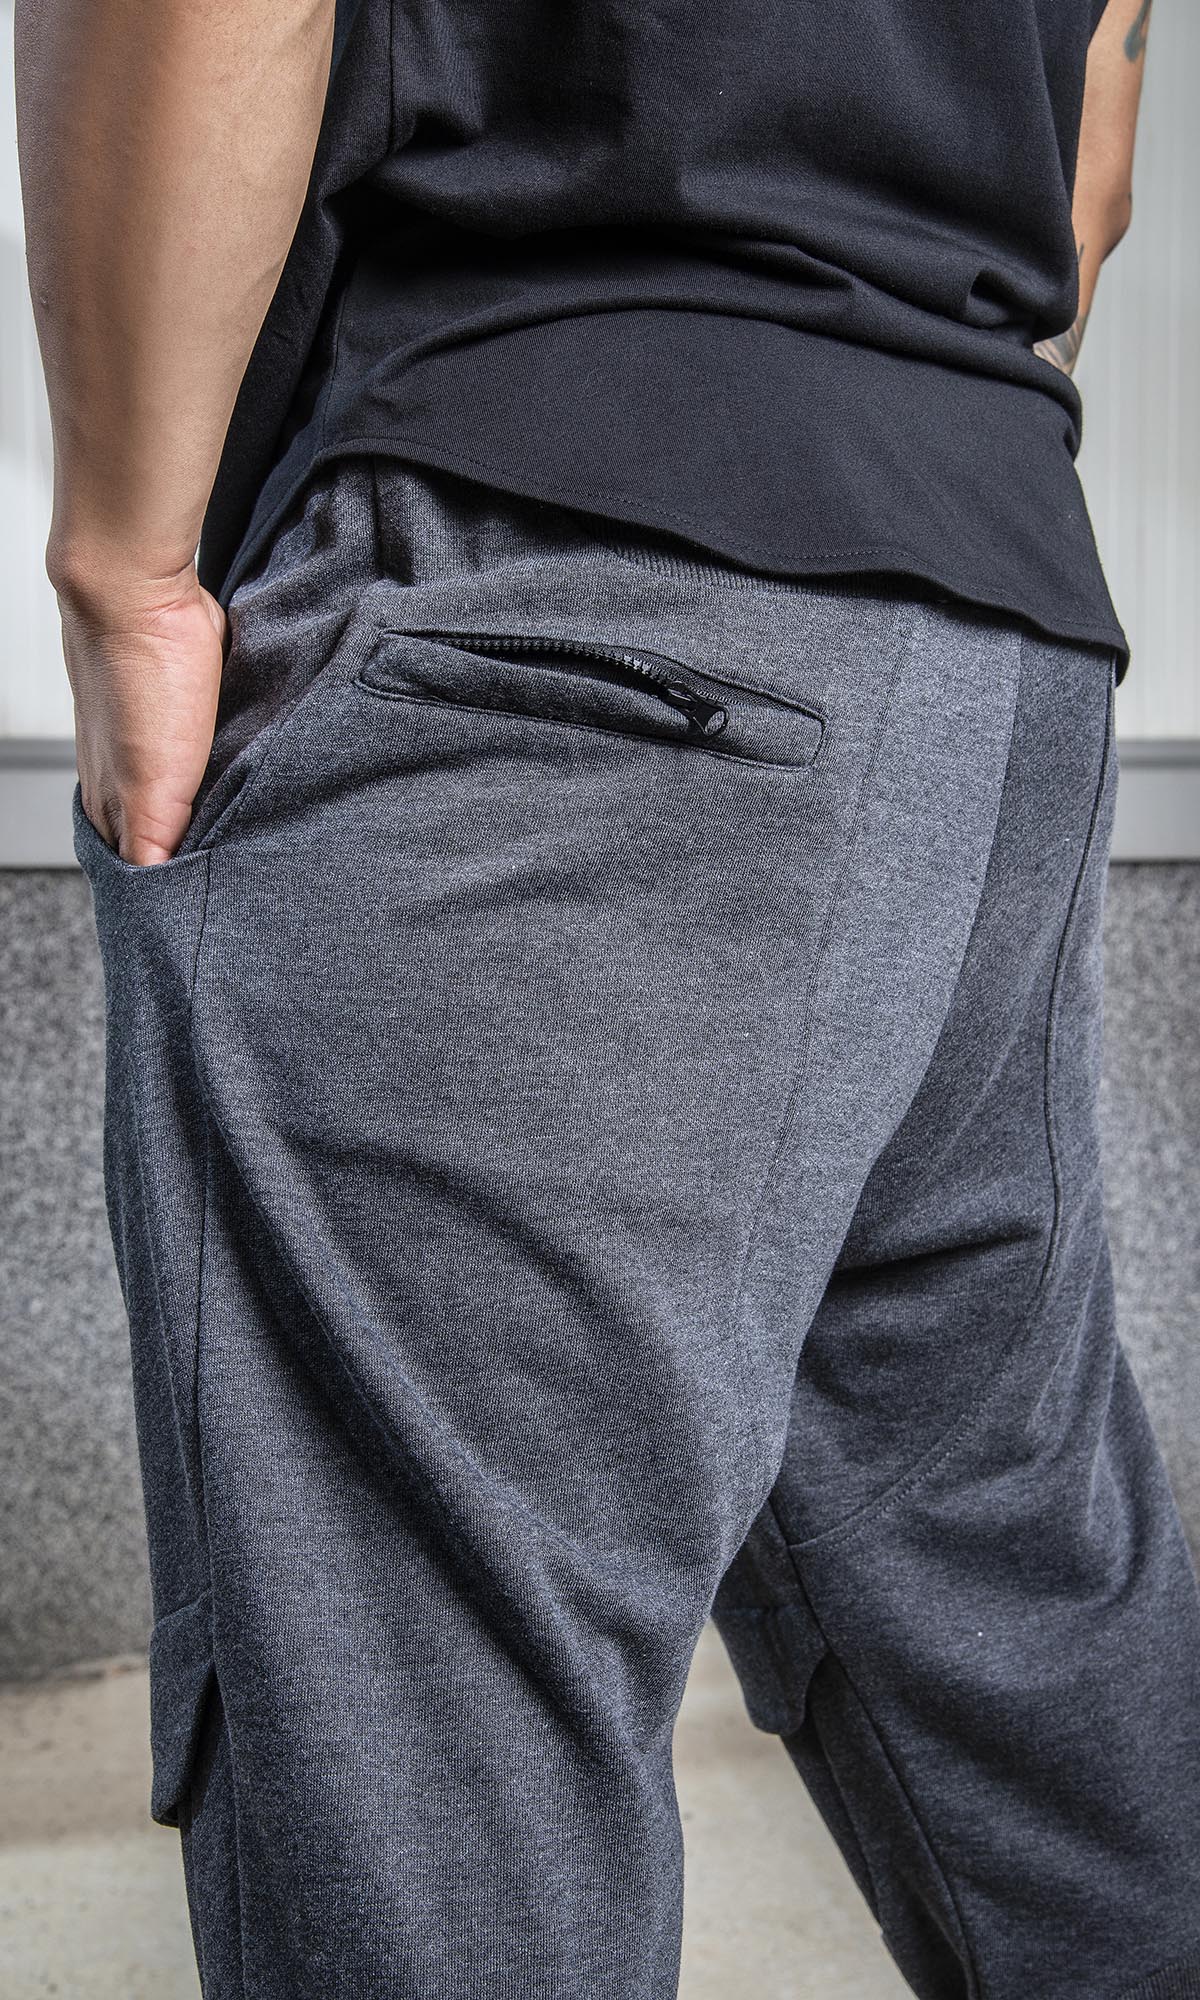 Loose Sweatpants With Knee Pads